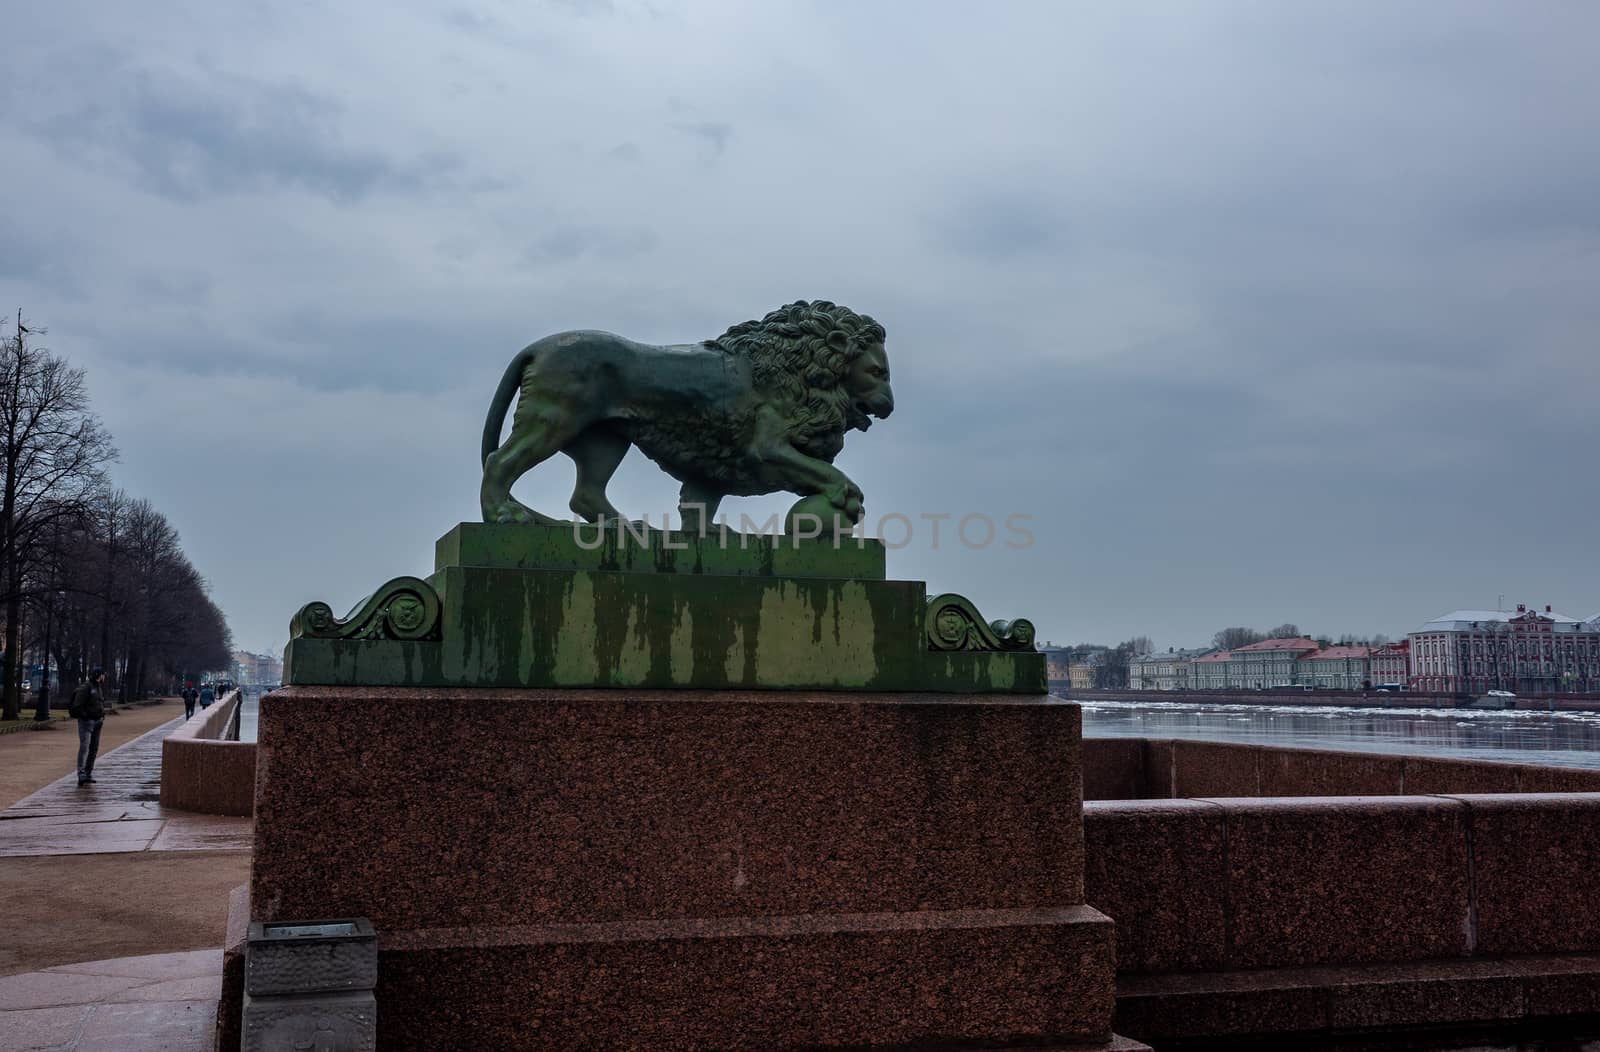 Sculpture of a lion on a granite pedestal on the embankment in St. Petersburg